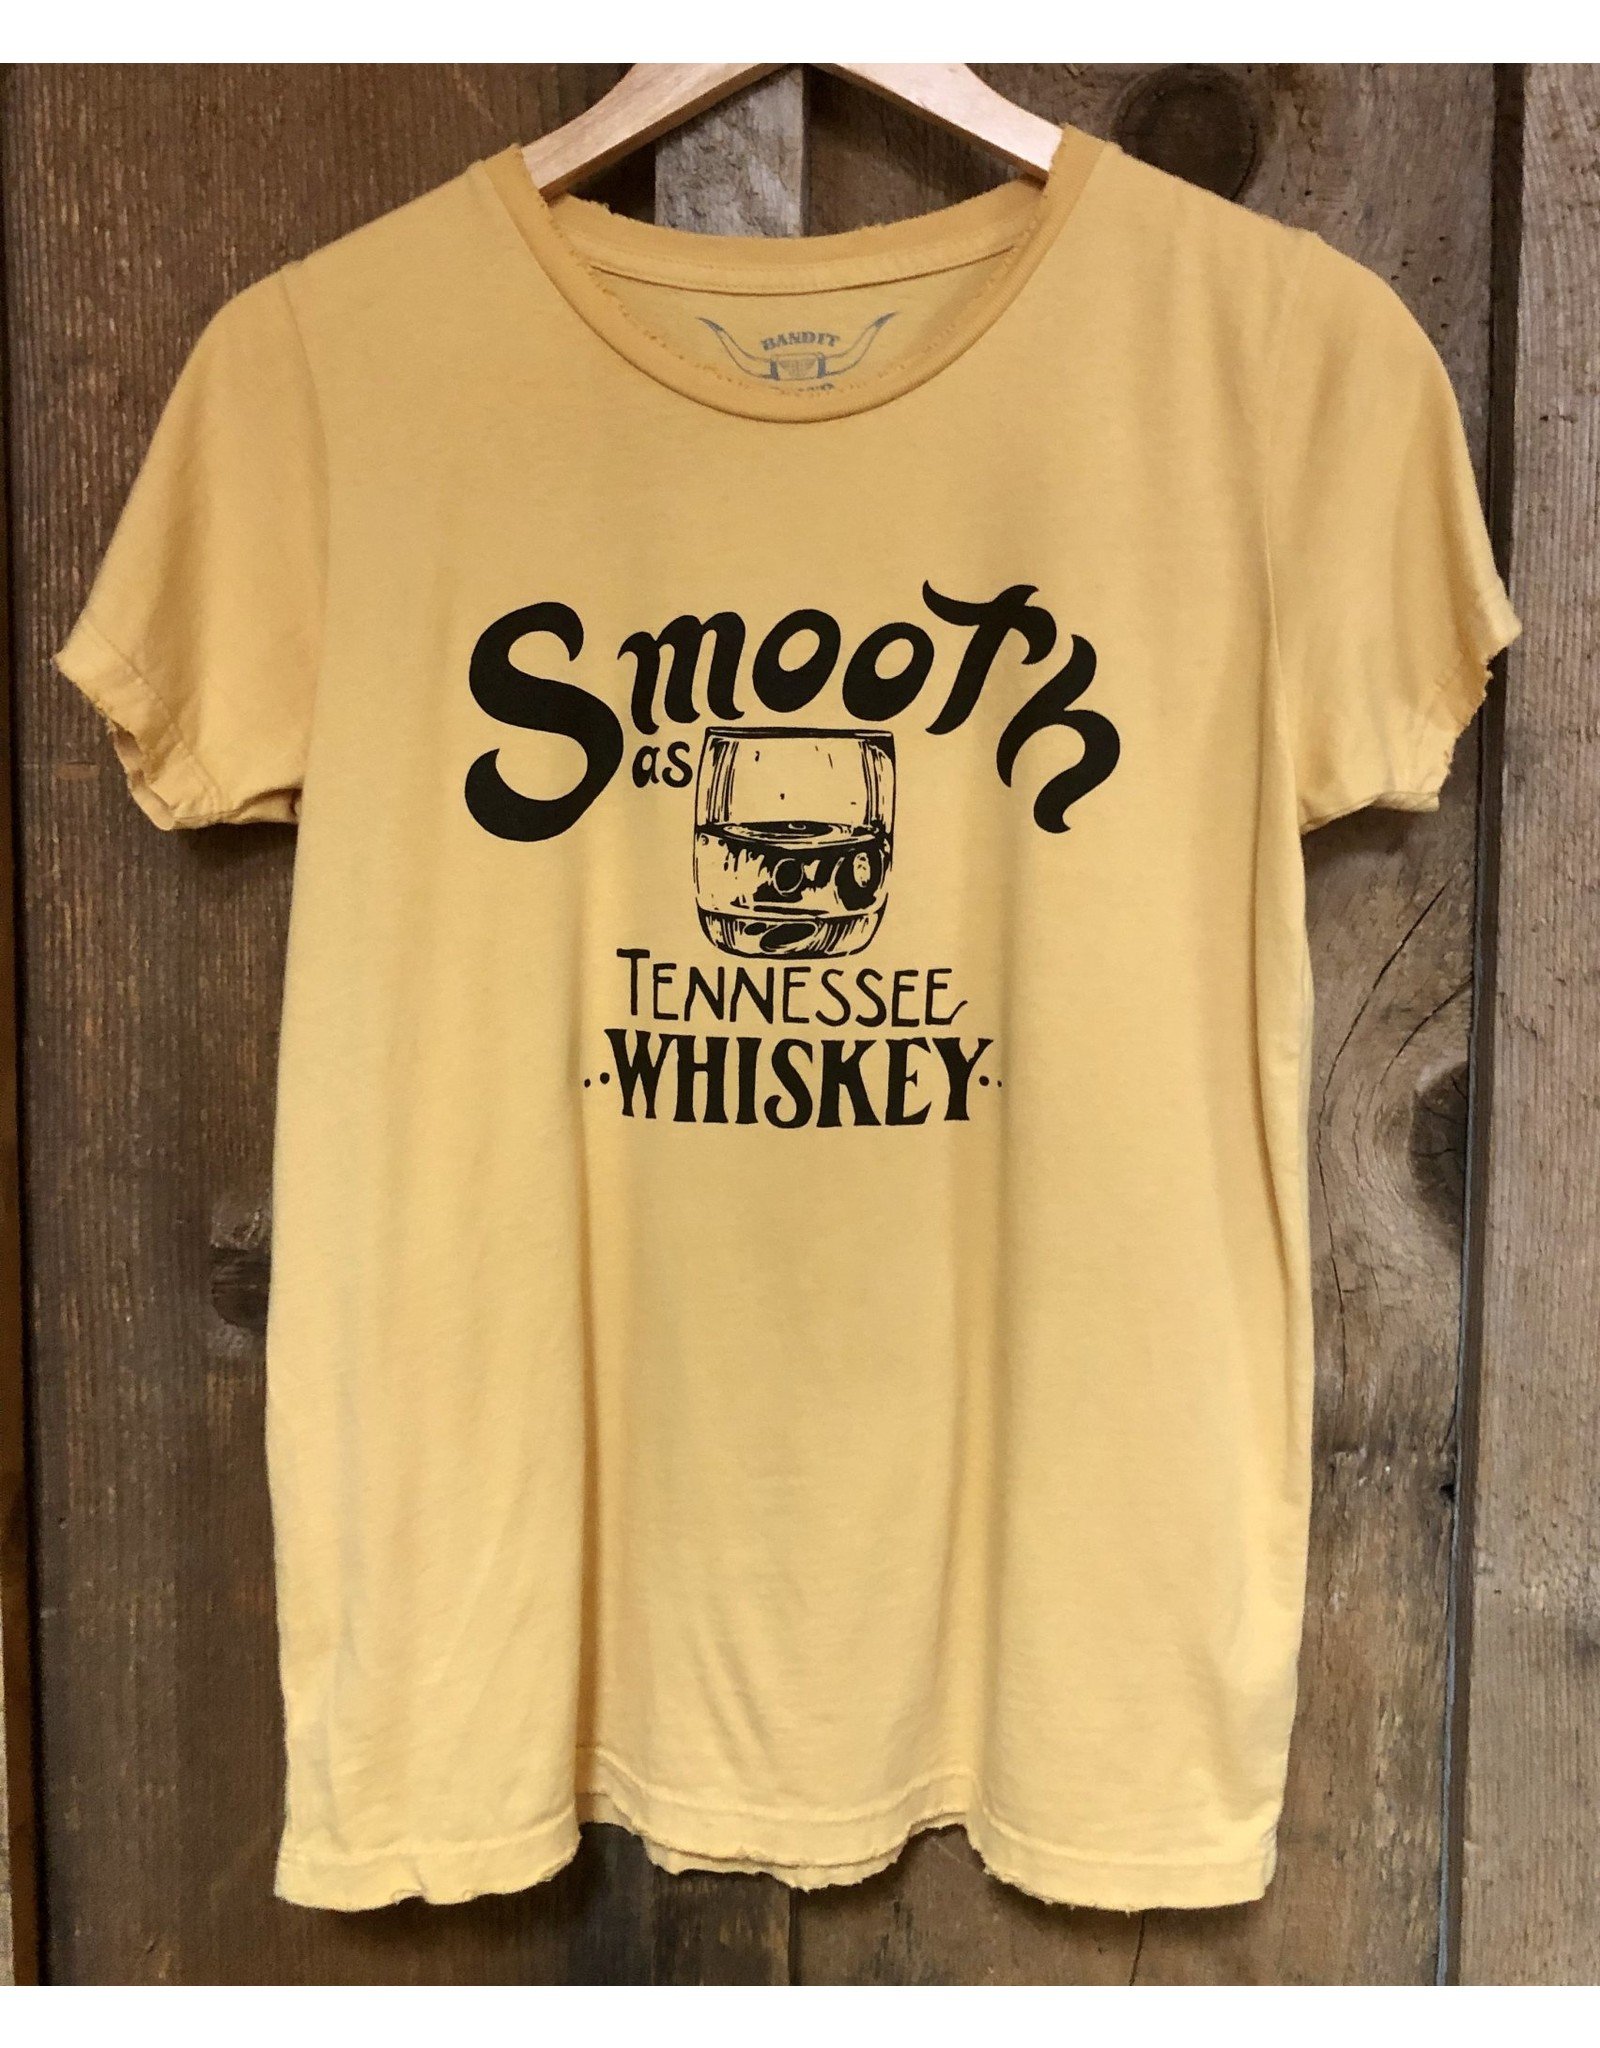 Bandit Bran Smooth Tennessee Whisky Tee